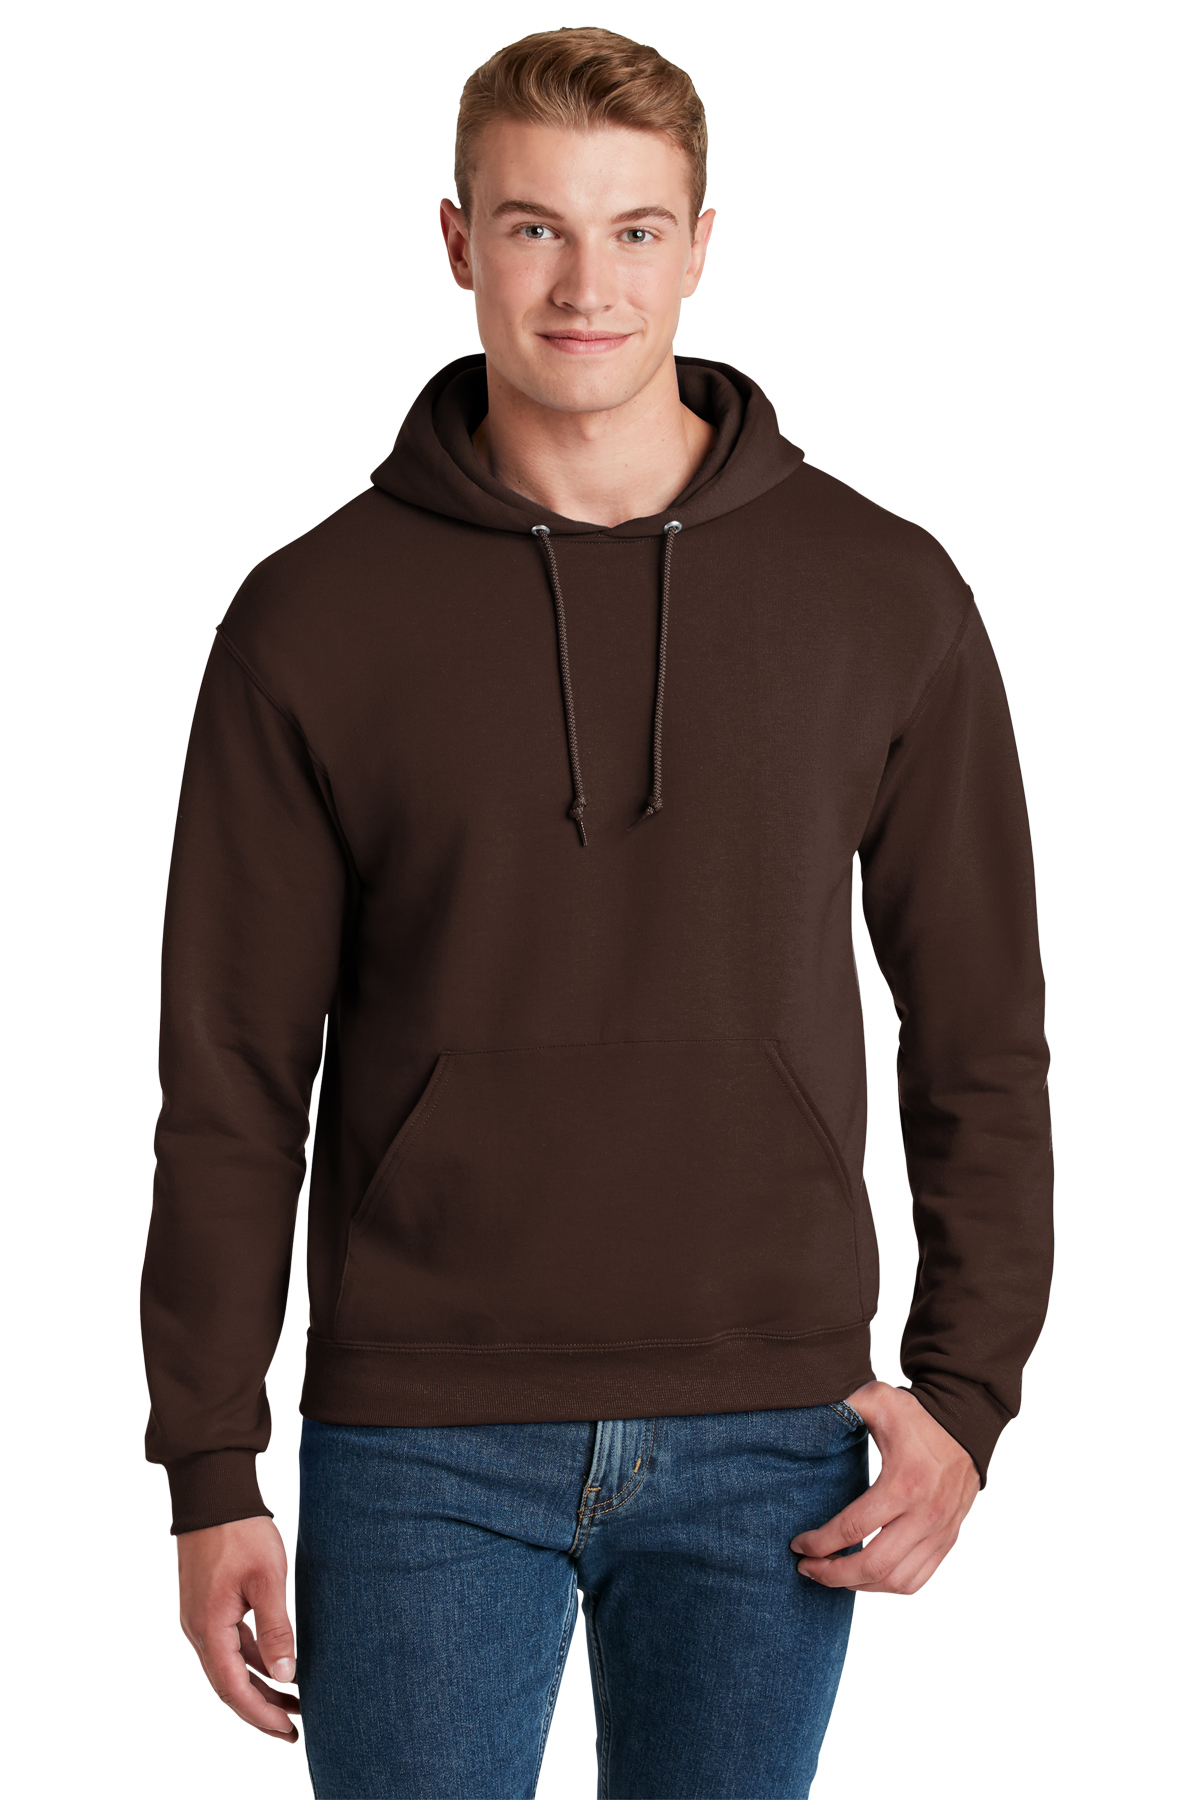 JERZEES - NuBlend Pullover Hooded Sweatshirt | Product | Company Casuals